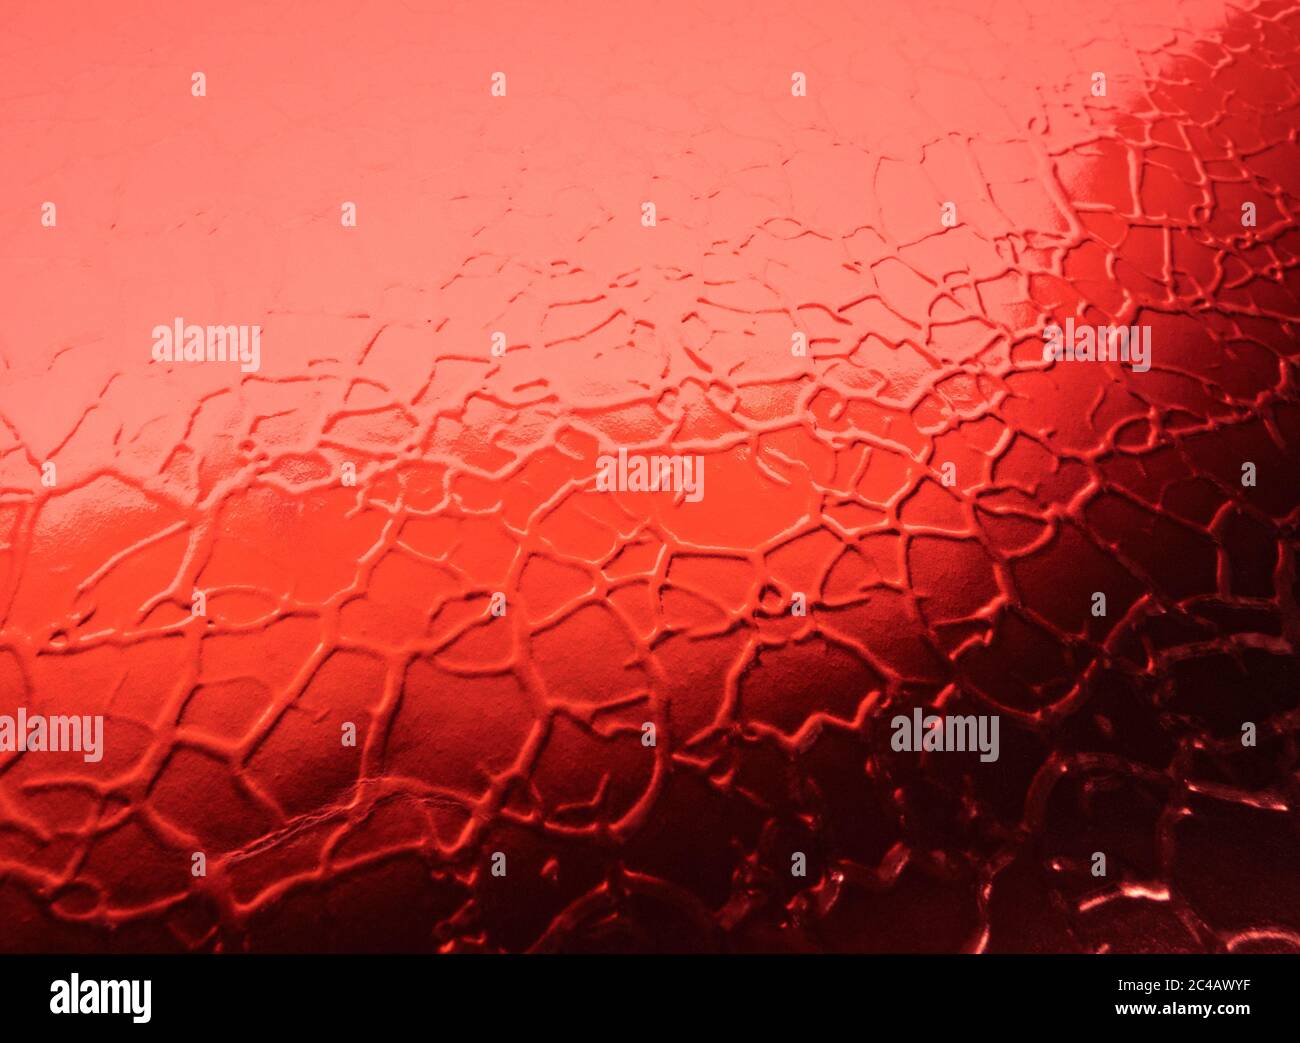 Close-up red metallic wrinkled background Stock Photo